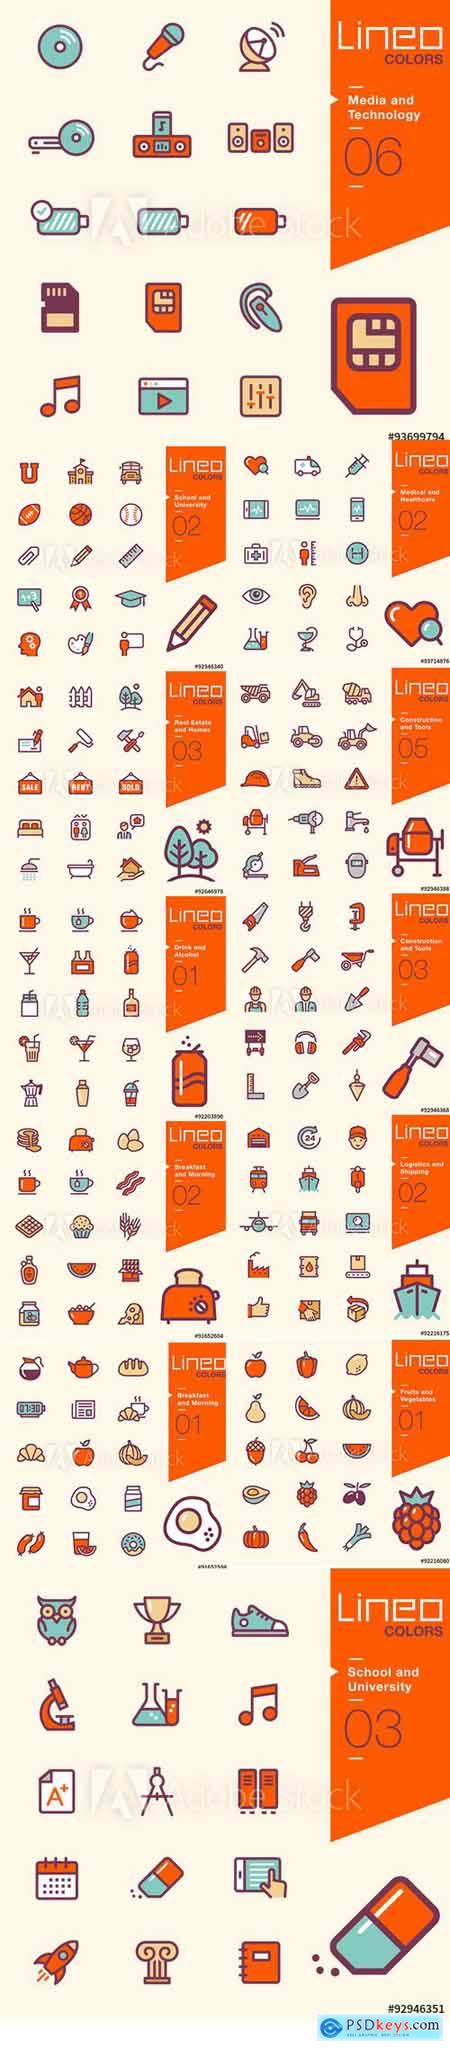 Vector Icons - Lineo Colors Pack